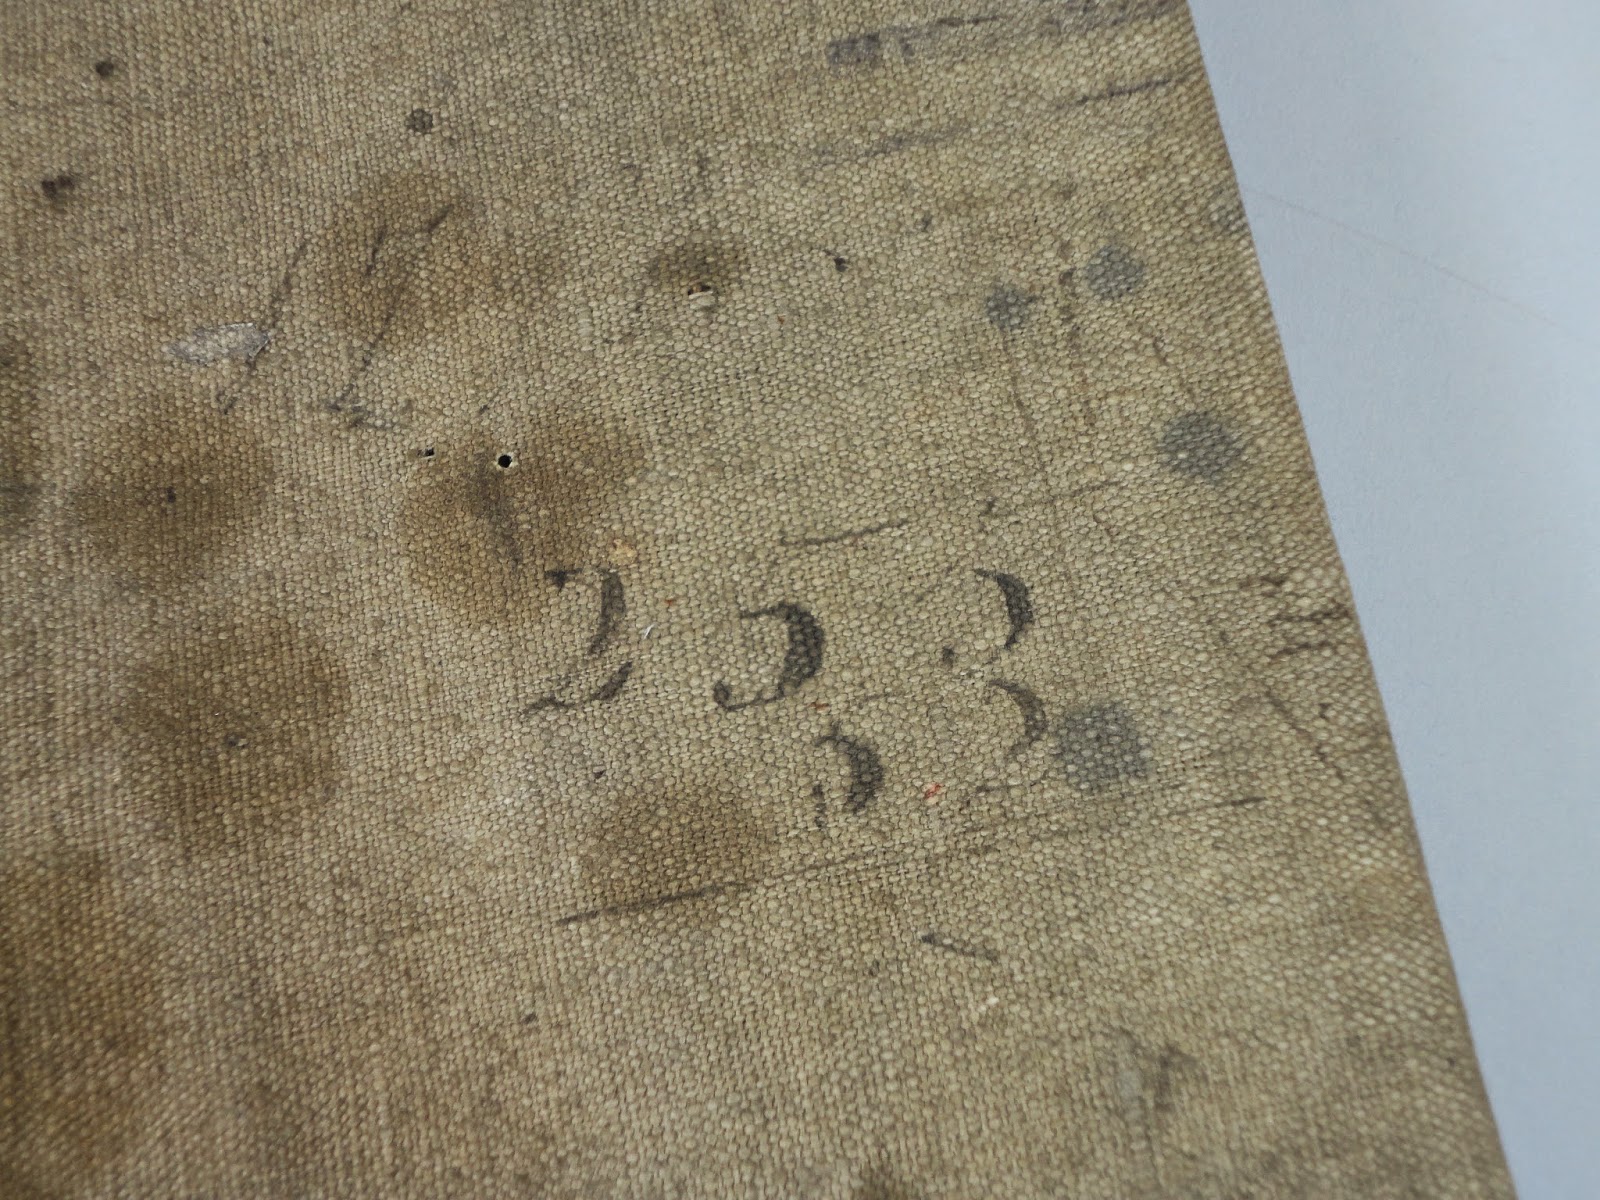 A close-up of the book over showing a series of ink marks.